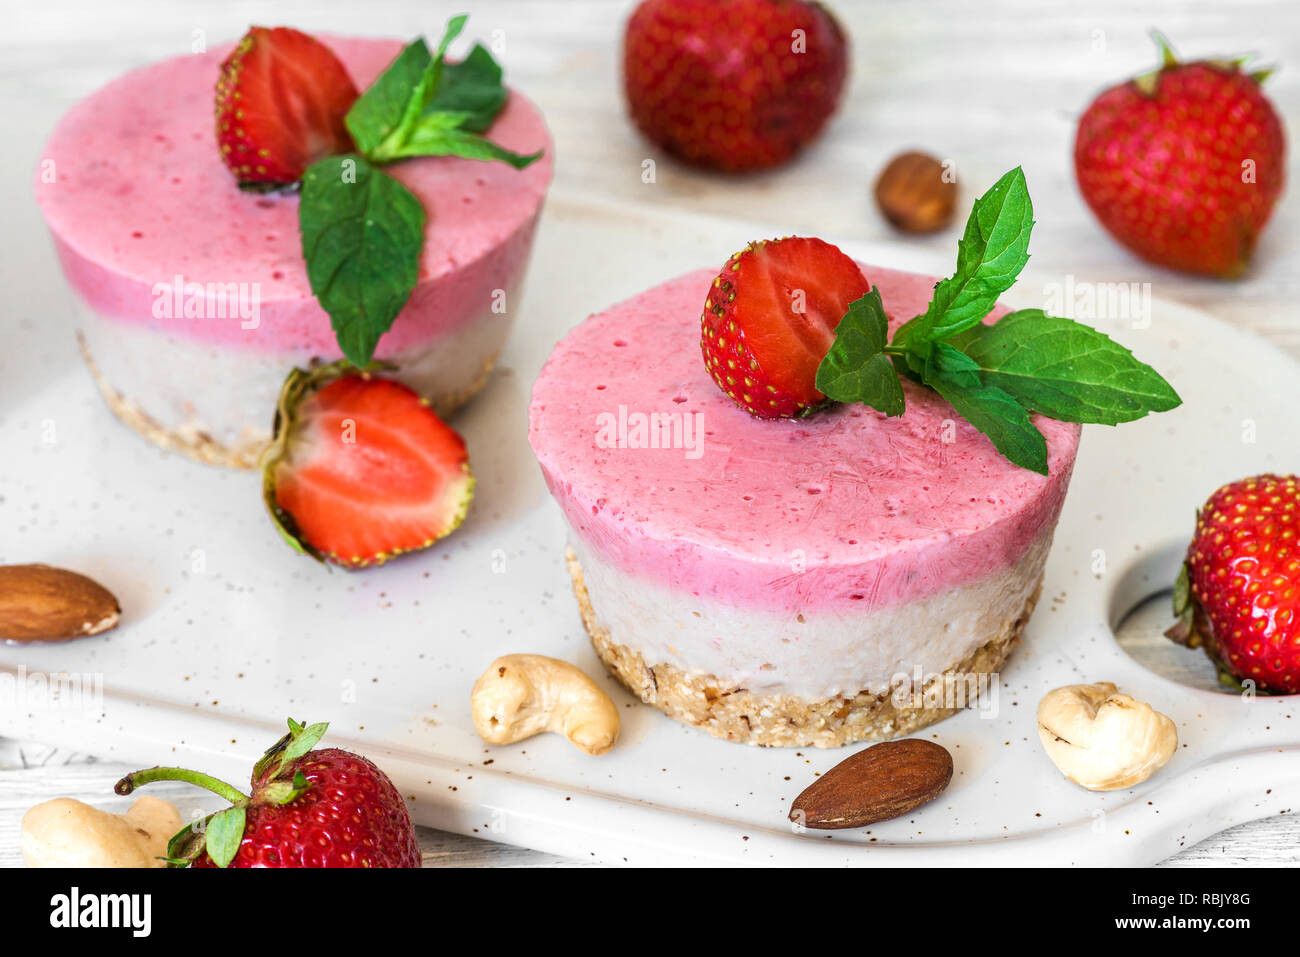 Vegan raw strawberry cheesecake with fresh berries, mint and nuts. healthy vegan food concept Stock Photo